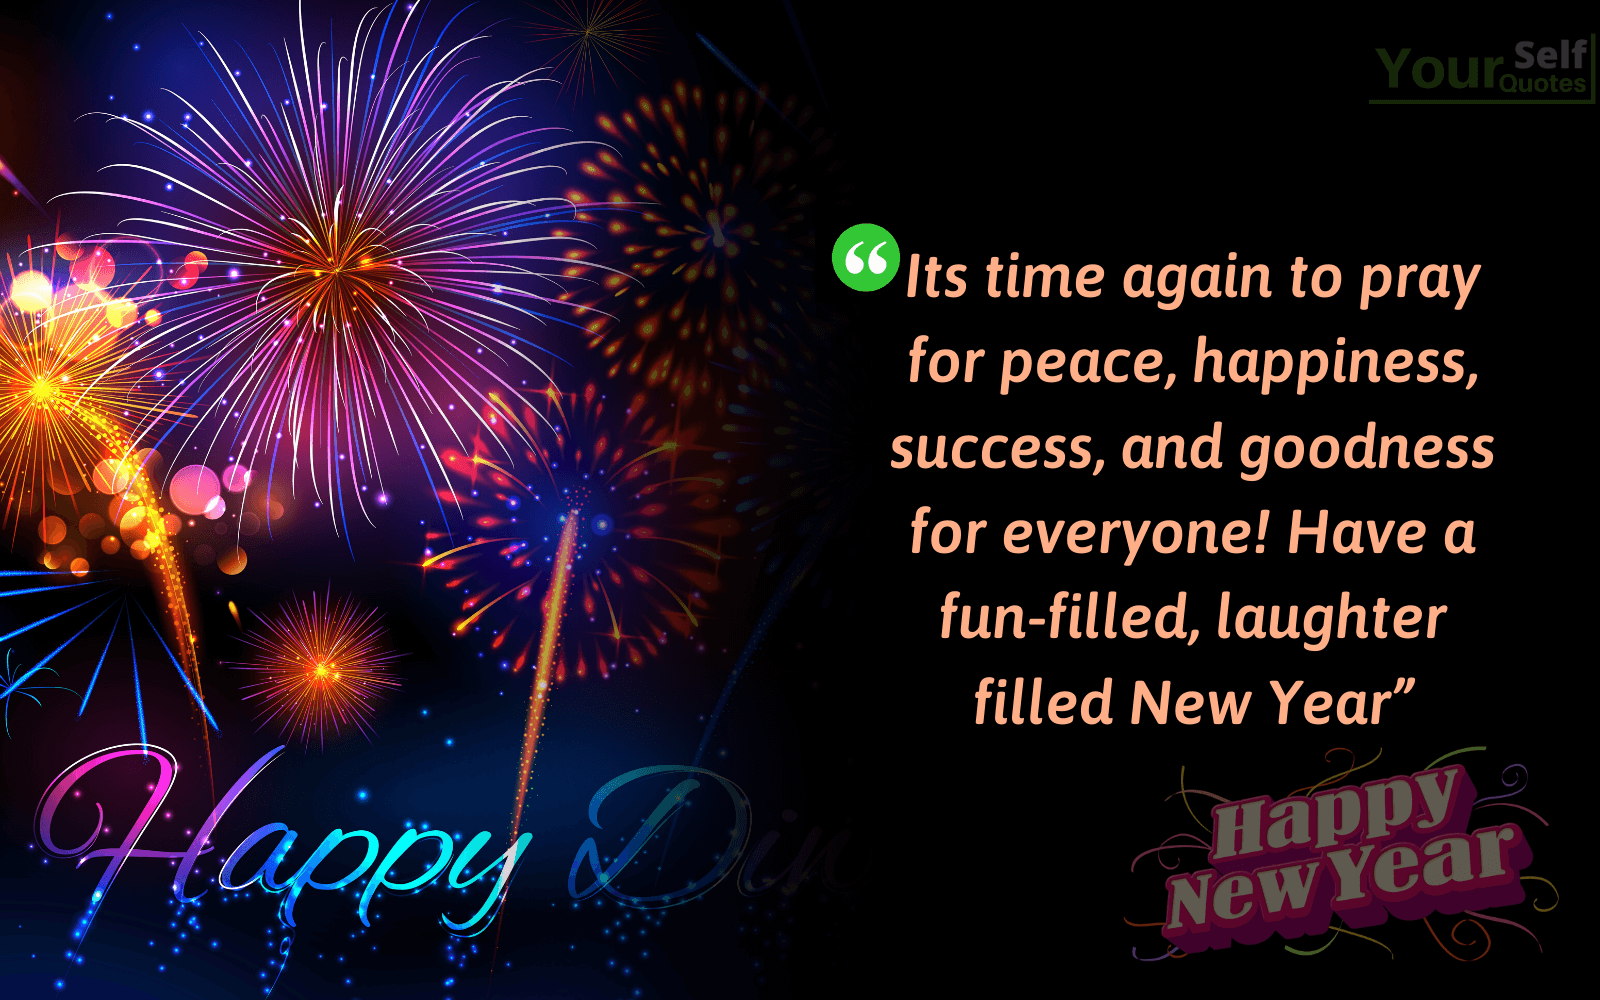 Happy New Year Greeting Cards Wallpaper